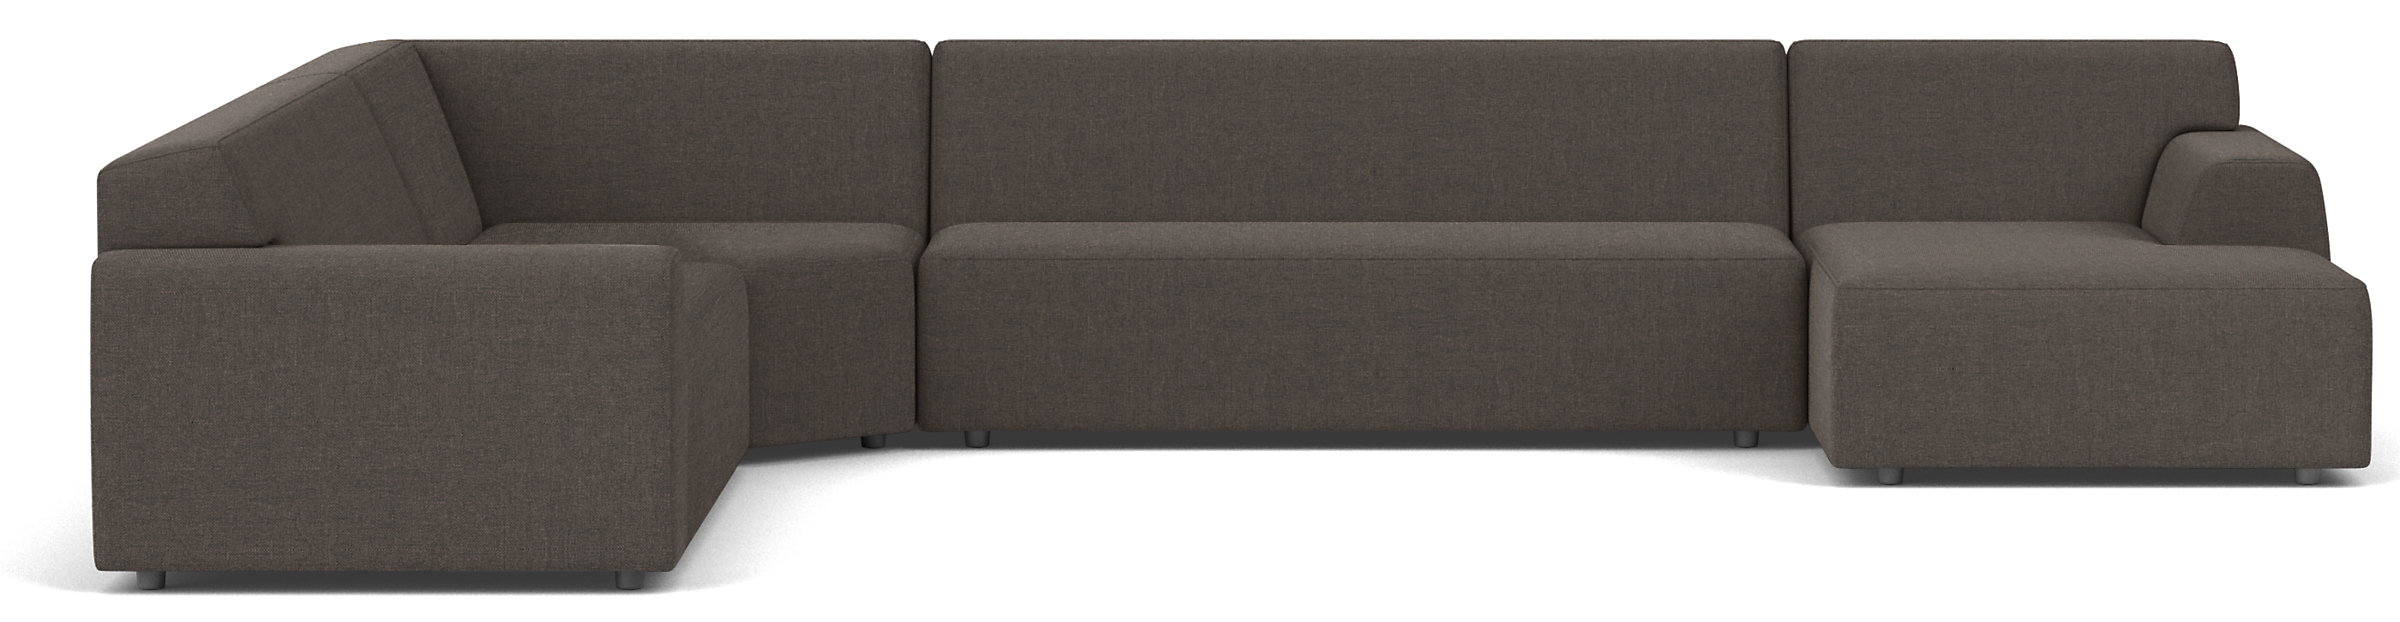 Linville 158x128" Four-Piece Sectional w/Right-Arm Chaise